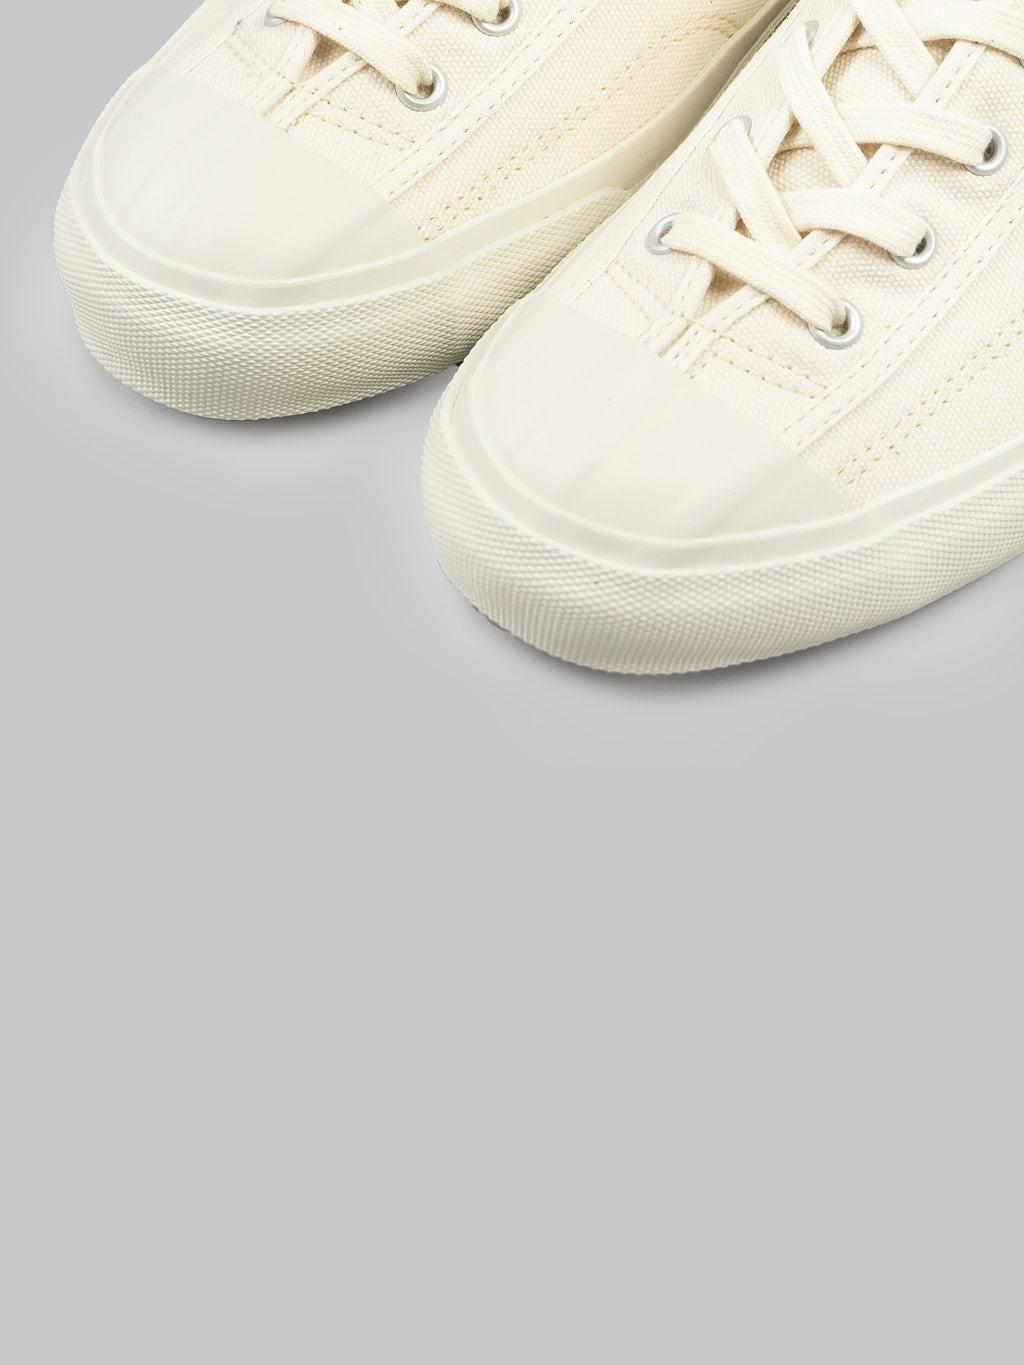 Moonstar Gym Classic White Sneakers toe